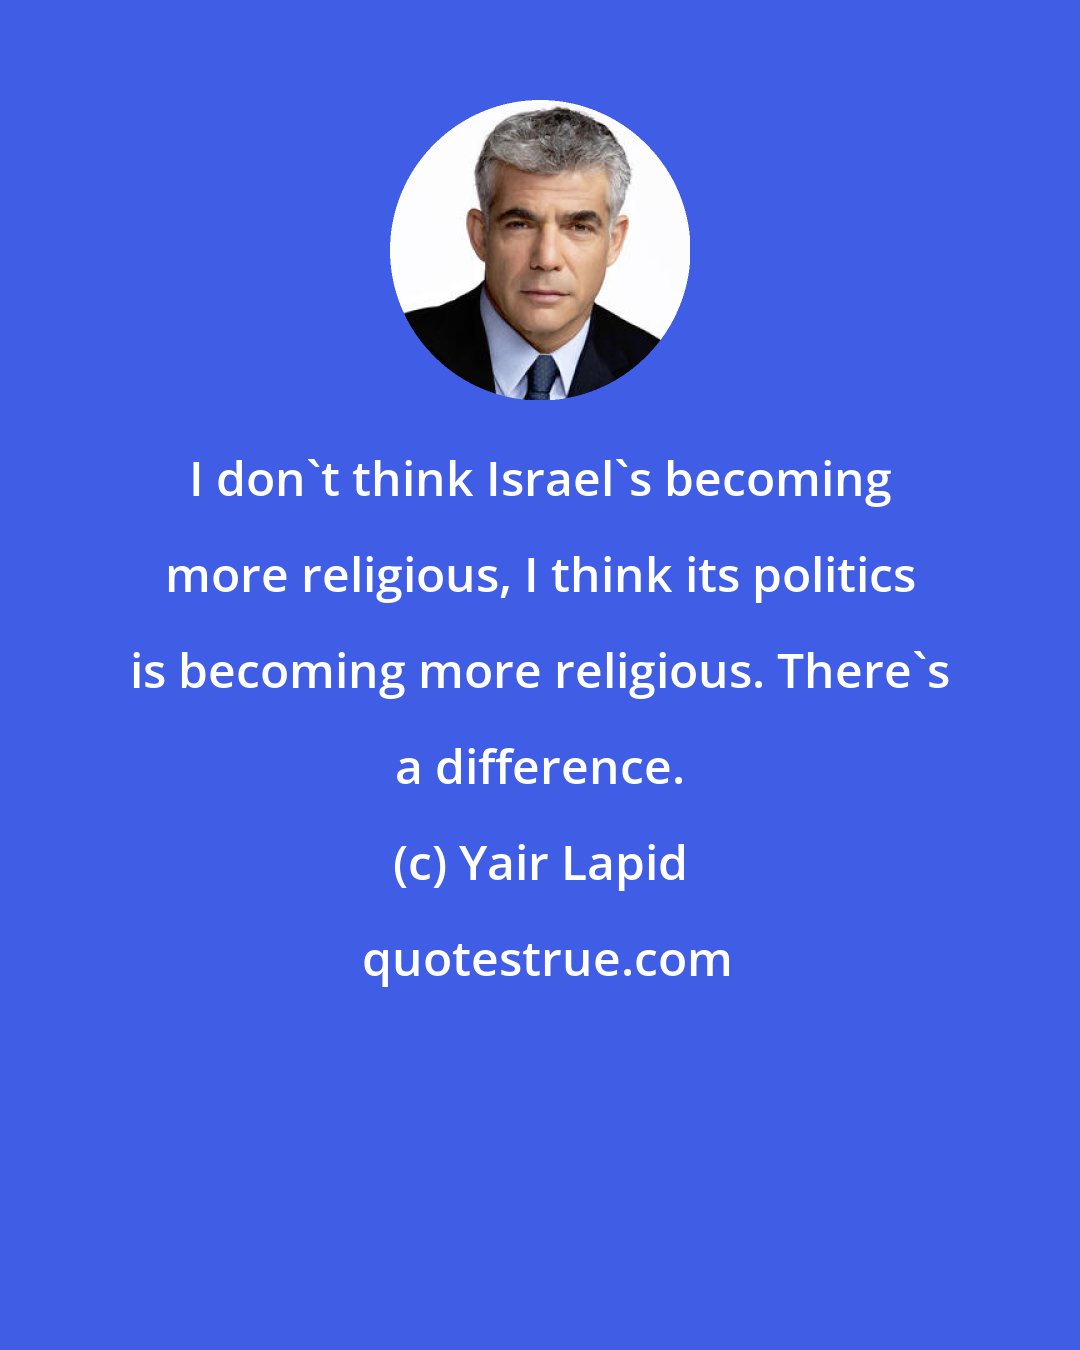 Yair Lapid: I don't think Israel's becoming more religious, I think its politics is becoming more religious. There's a difference.